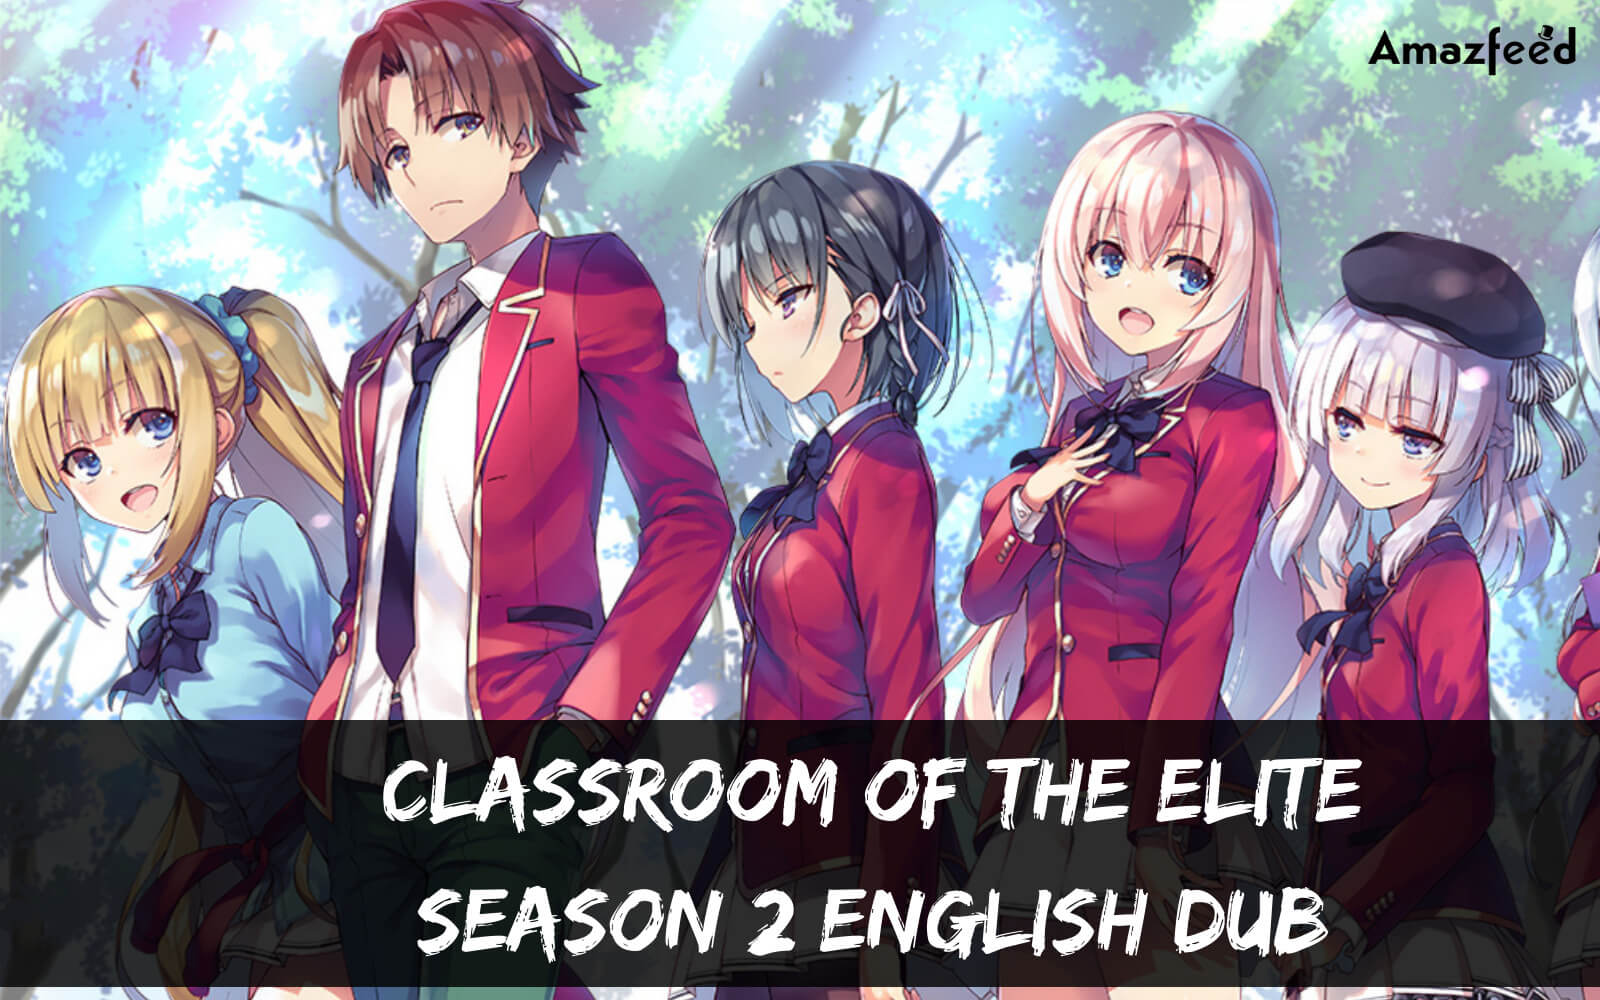 Classroom of the Elite Season 2 Episode 2 Release Date & Time